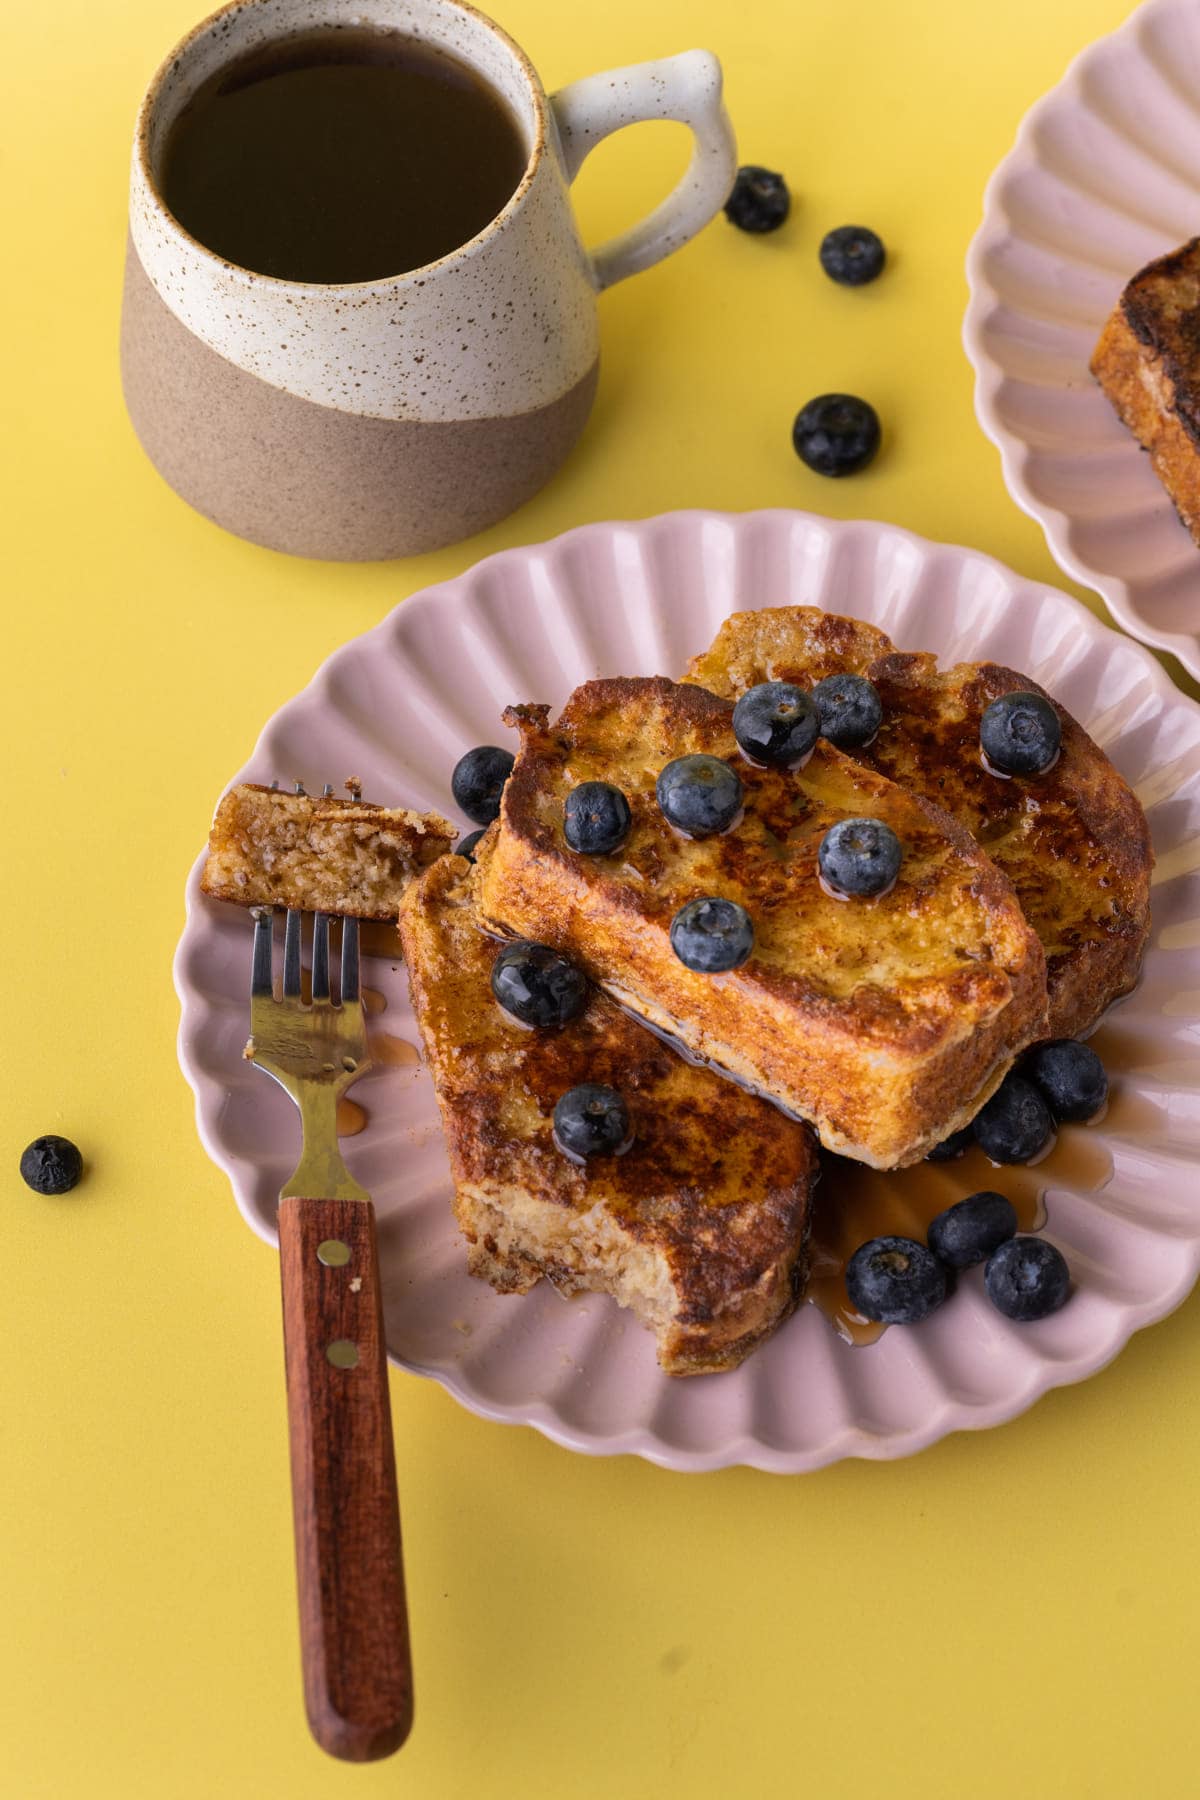 Plate of Banana Bread French Toast garnished with blueberries